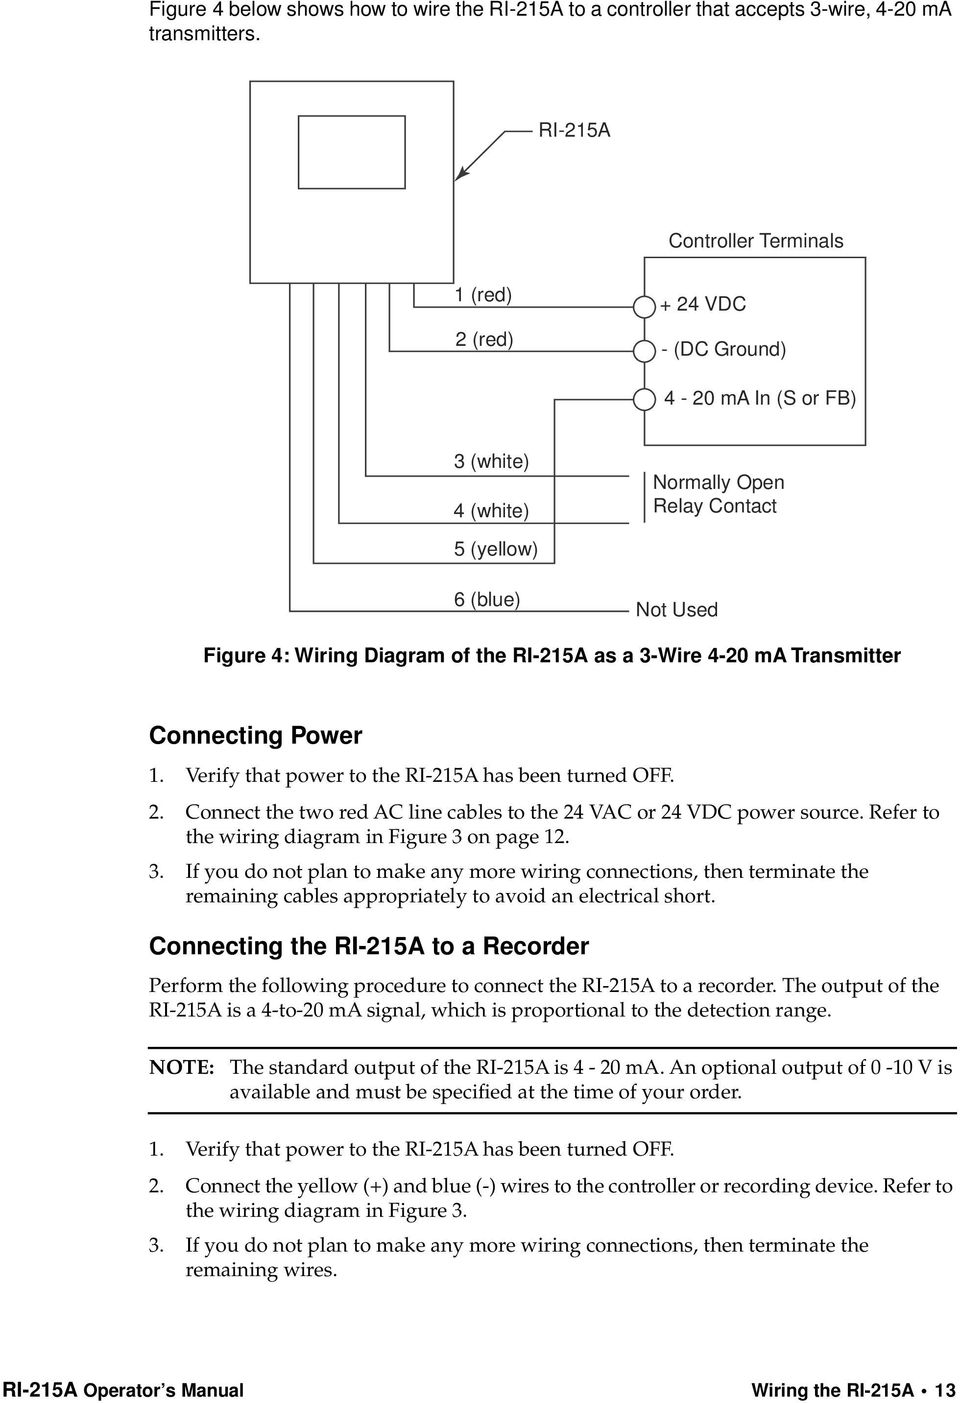 RI-215A as a 3-Wire 4-20 ma Transmitter Connecting Power 1. Verify that power to the RI-215A has been turned OFF. 2. Connect the two red AC line cables to the 24 VAC or 24 VDC power source.